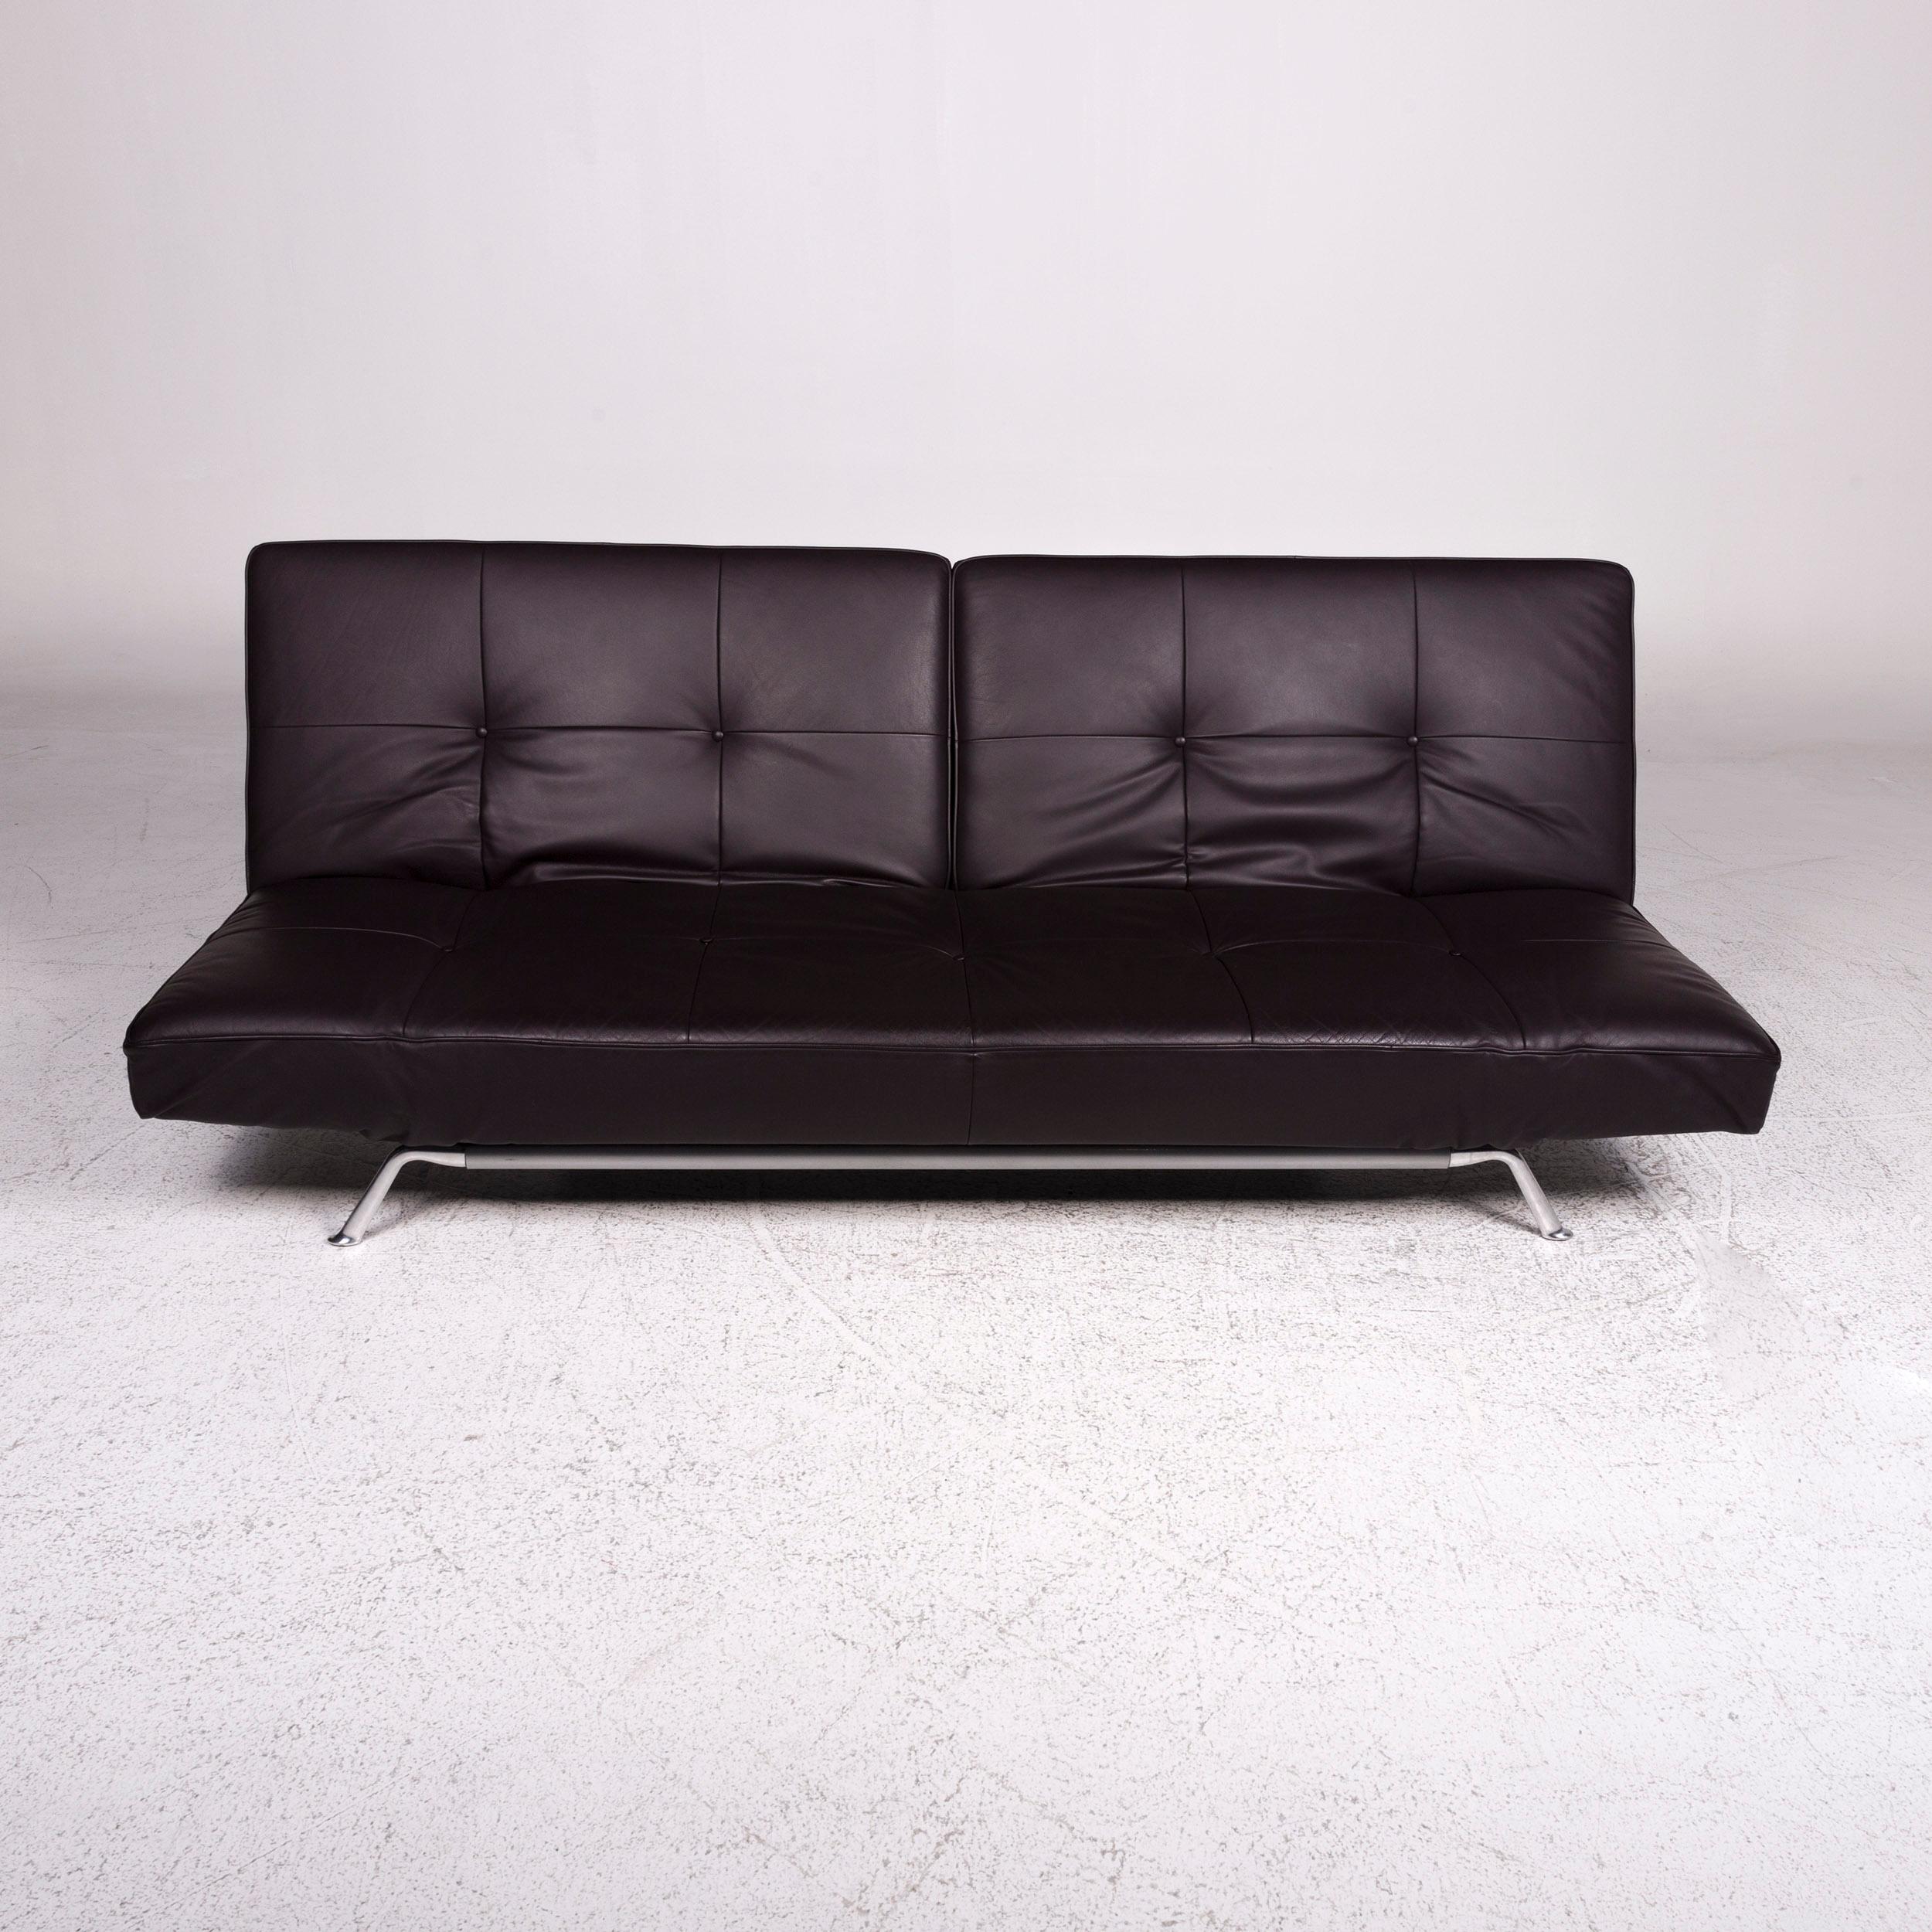 French Ligne Roset Smala Leather Sofa Eggplant Two-Seat Sofa Bed Function Couch